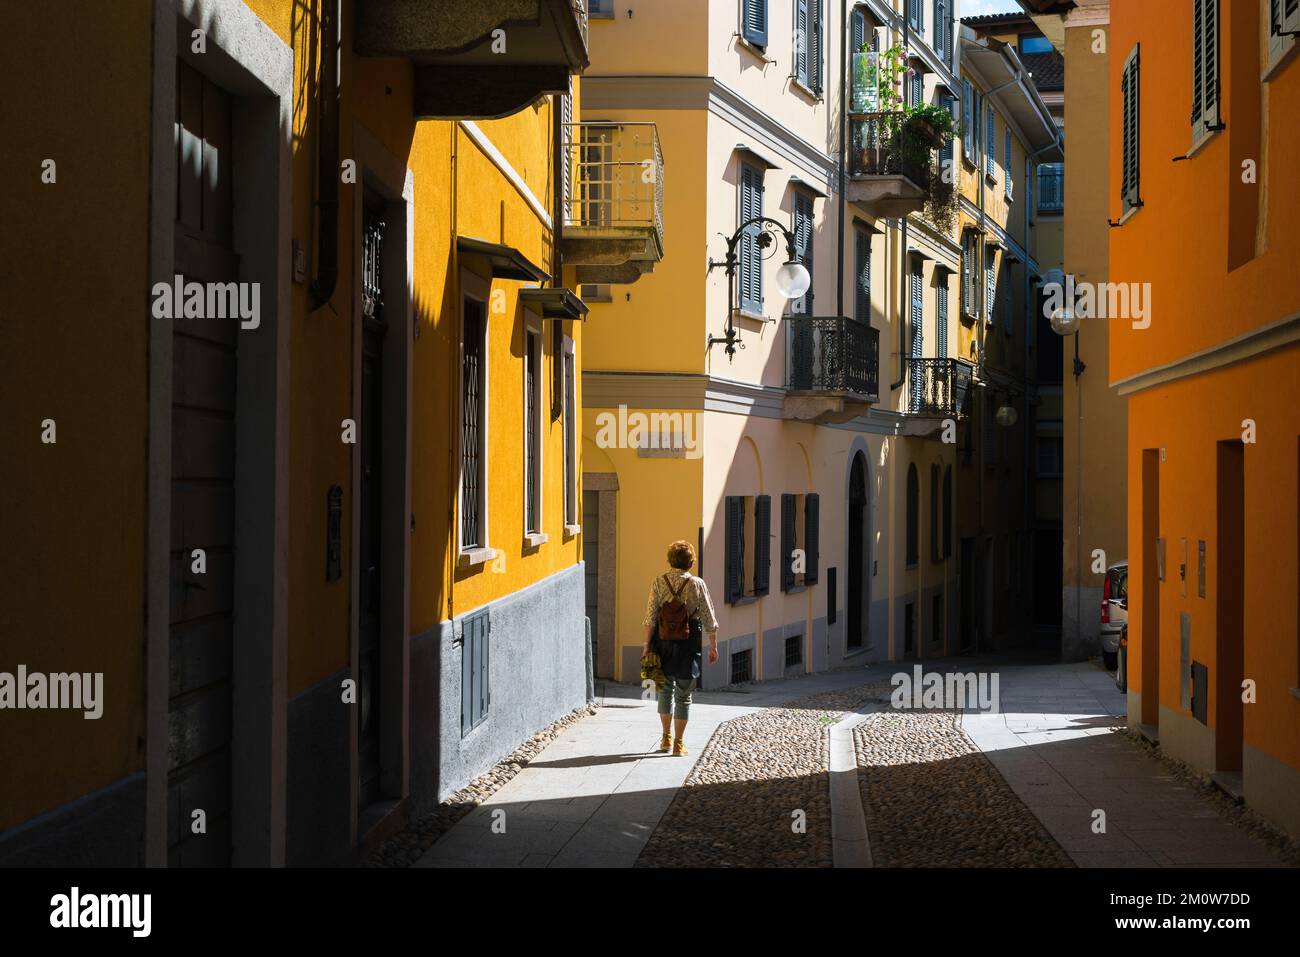 Italy travel, view in summer of a woman wearing a backpack exploring a colourful street in the town of Pallanza in Lake Maggiore, Piedmont, Italy Stock Photo